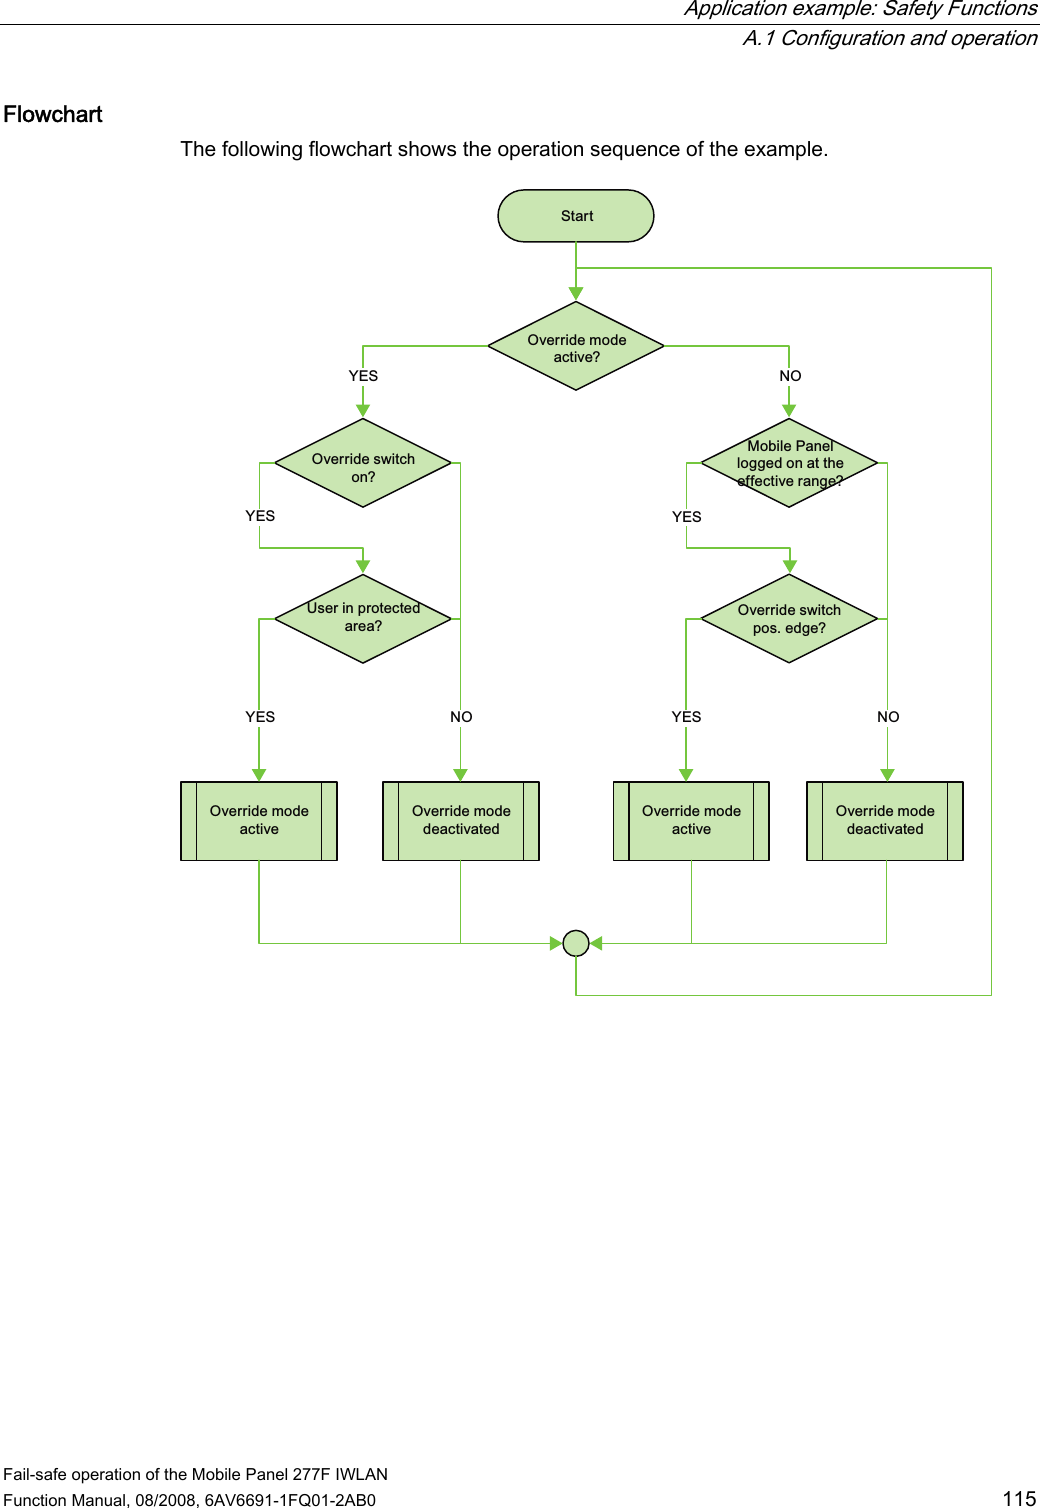  Application example: Safety Functions  A.1 Configuration and operation Fail-safe operation of the Mobile Panel 277F IWLAN  Function Manual, 08/2008, 6AV6691-1FQ01-2AB0  115 Flowchart The following flowchart shows the operation sequence of the example.  6WDUW2YHUULGHPRGHDFWLYH&quot;2YHUULGHPRGHDFWLYH2YHUULGHPRGHGHDFWLYDWHG2YHUULGHPRGHDFWLYH2YHUULGHPRGHGHDFWLYDWHG2YHUULGHVZLWFKRQ&quot;8VHULQSURWHFWHGDUHD&quot;0RELOH3DQHOORJJHGRQDWWKHHIIHFWLYHUDQJH&quot;2YHUULGHVZLWFKSRVHGJH&quot;&lt;(6&lt;(6&lt;(6 1212&lt;(6 12&lt;(6  